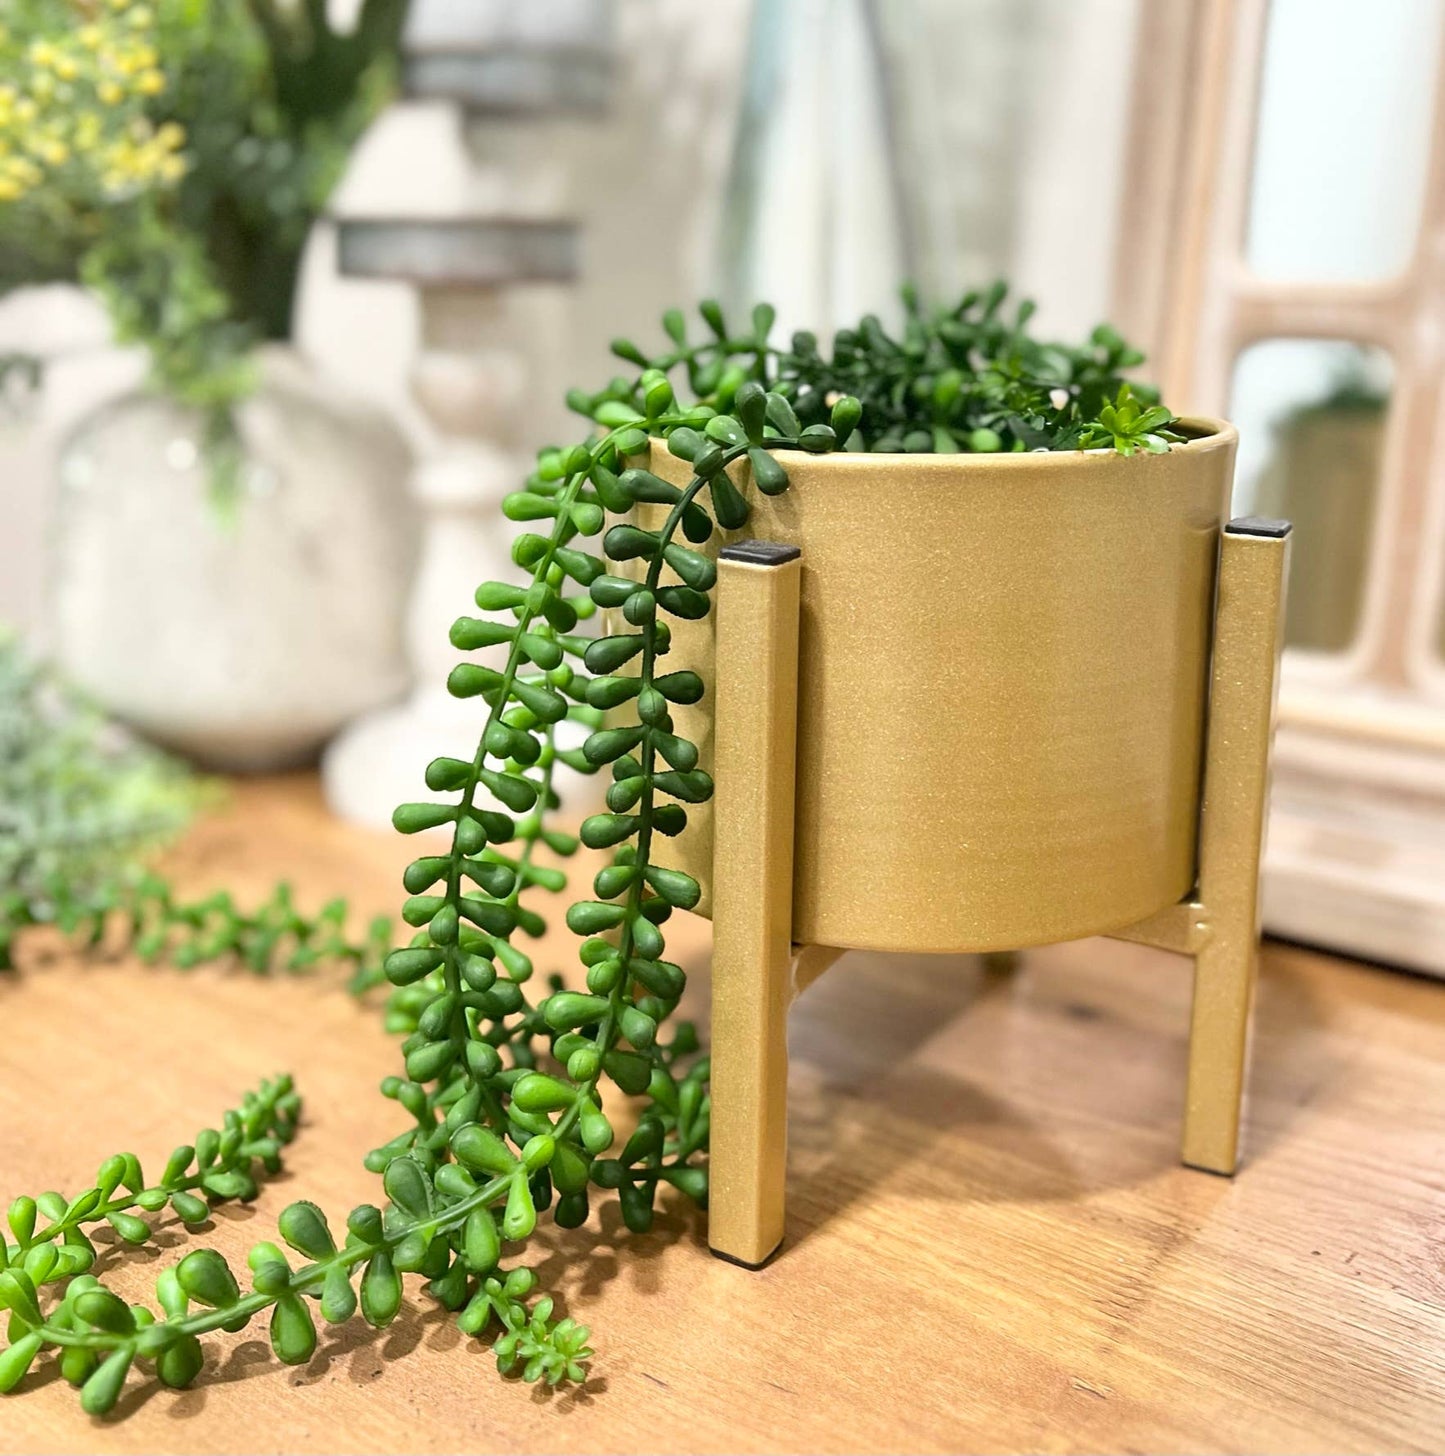 6" Gold Metal Planter with stand tabletop decor